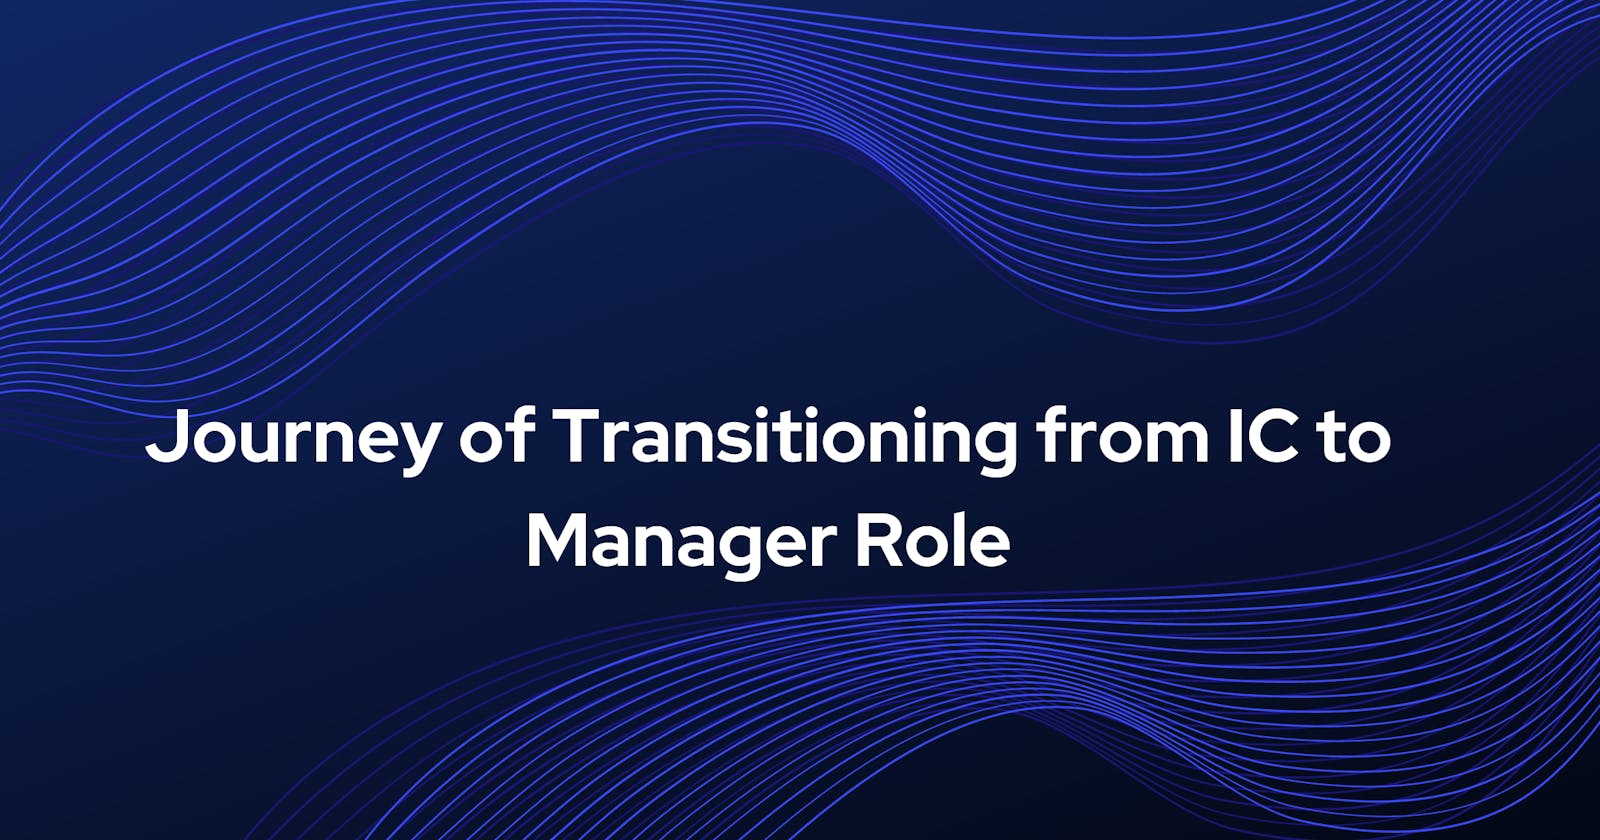 Journey of Transitioning from IC to Manager Role